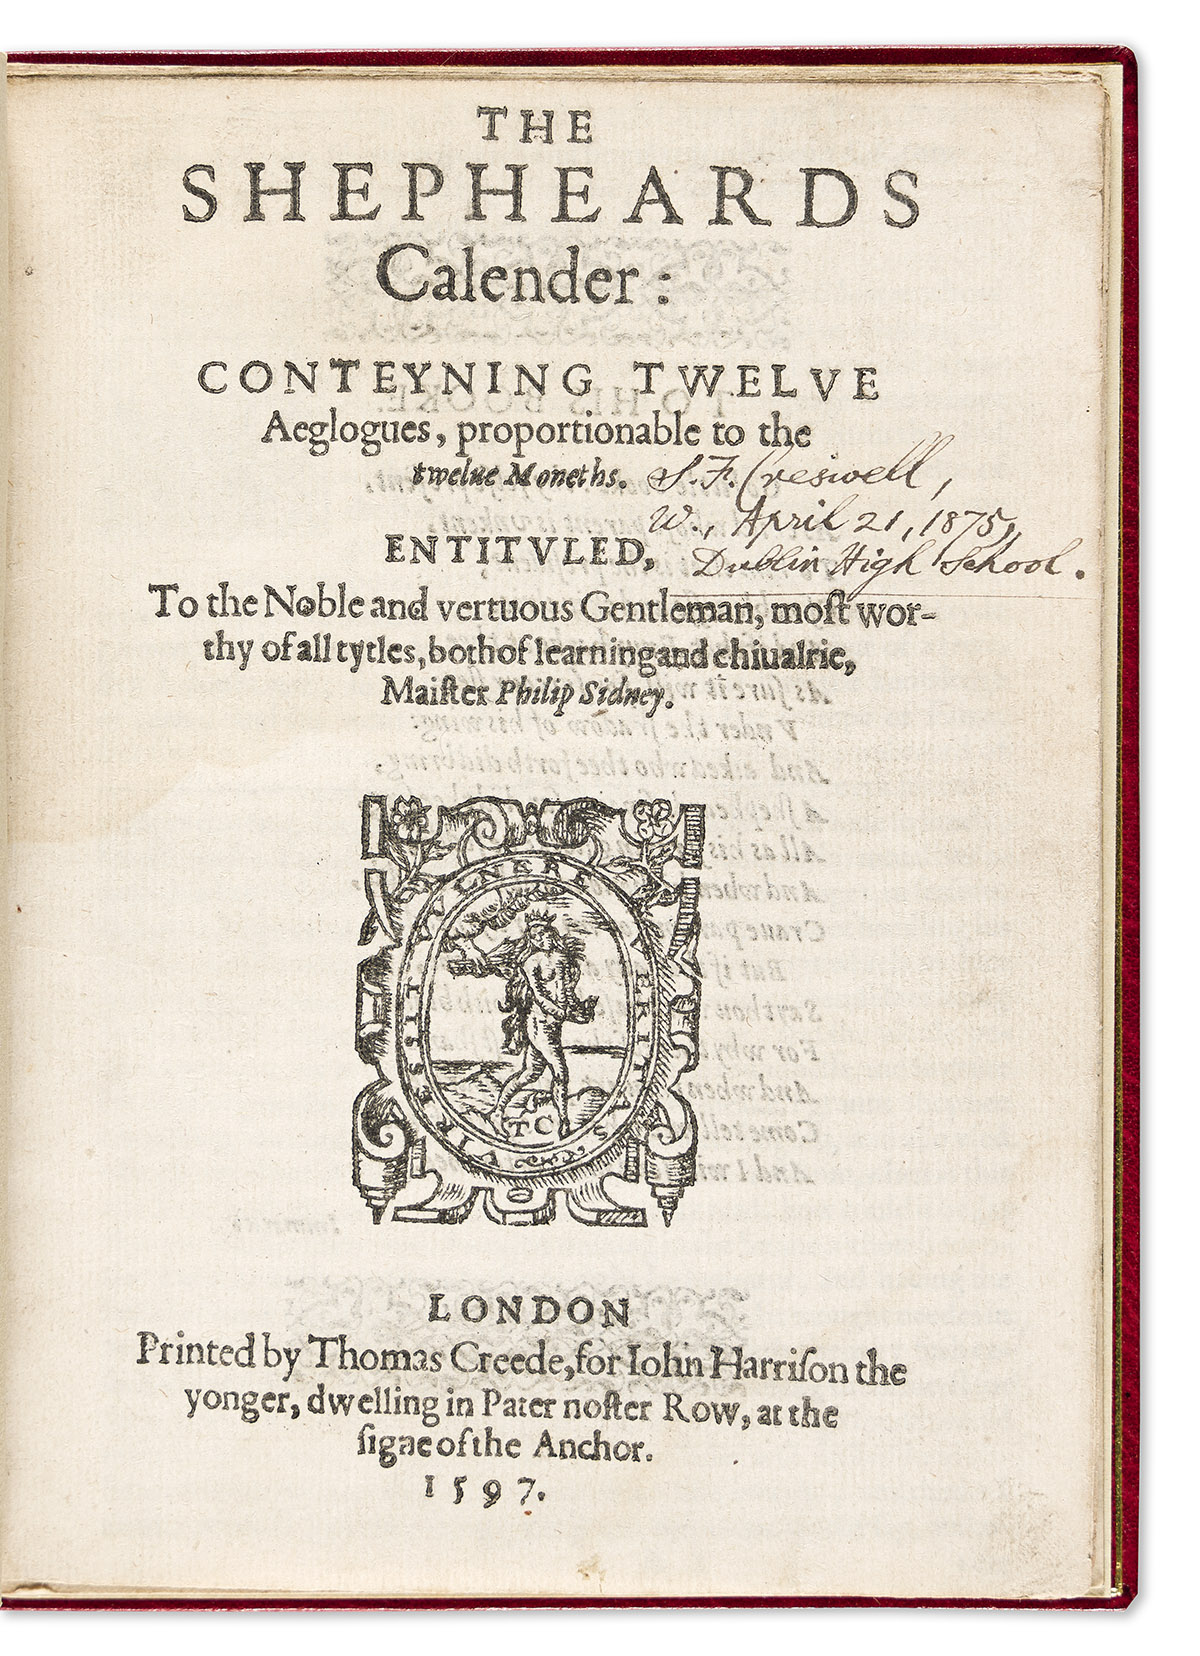 Spenser, Edmund (1552?-1599) The Shepheards Calender: Conteyning Twelve Aeglogues, proportionable to the Twelve Moneths.